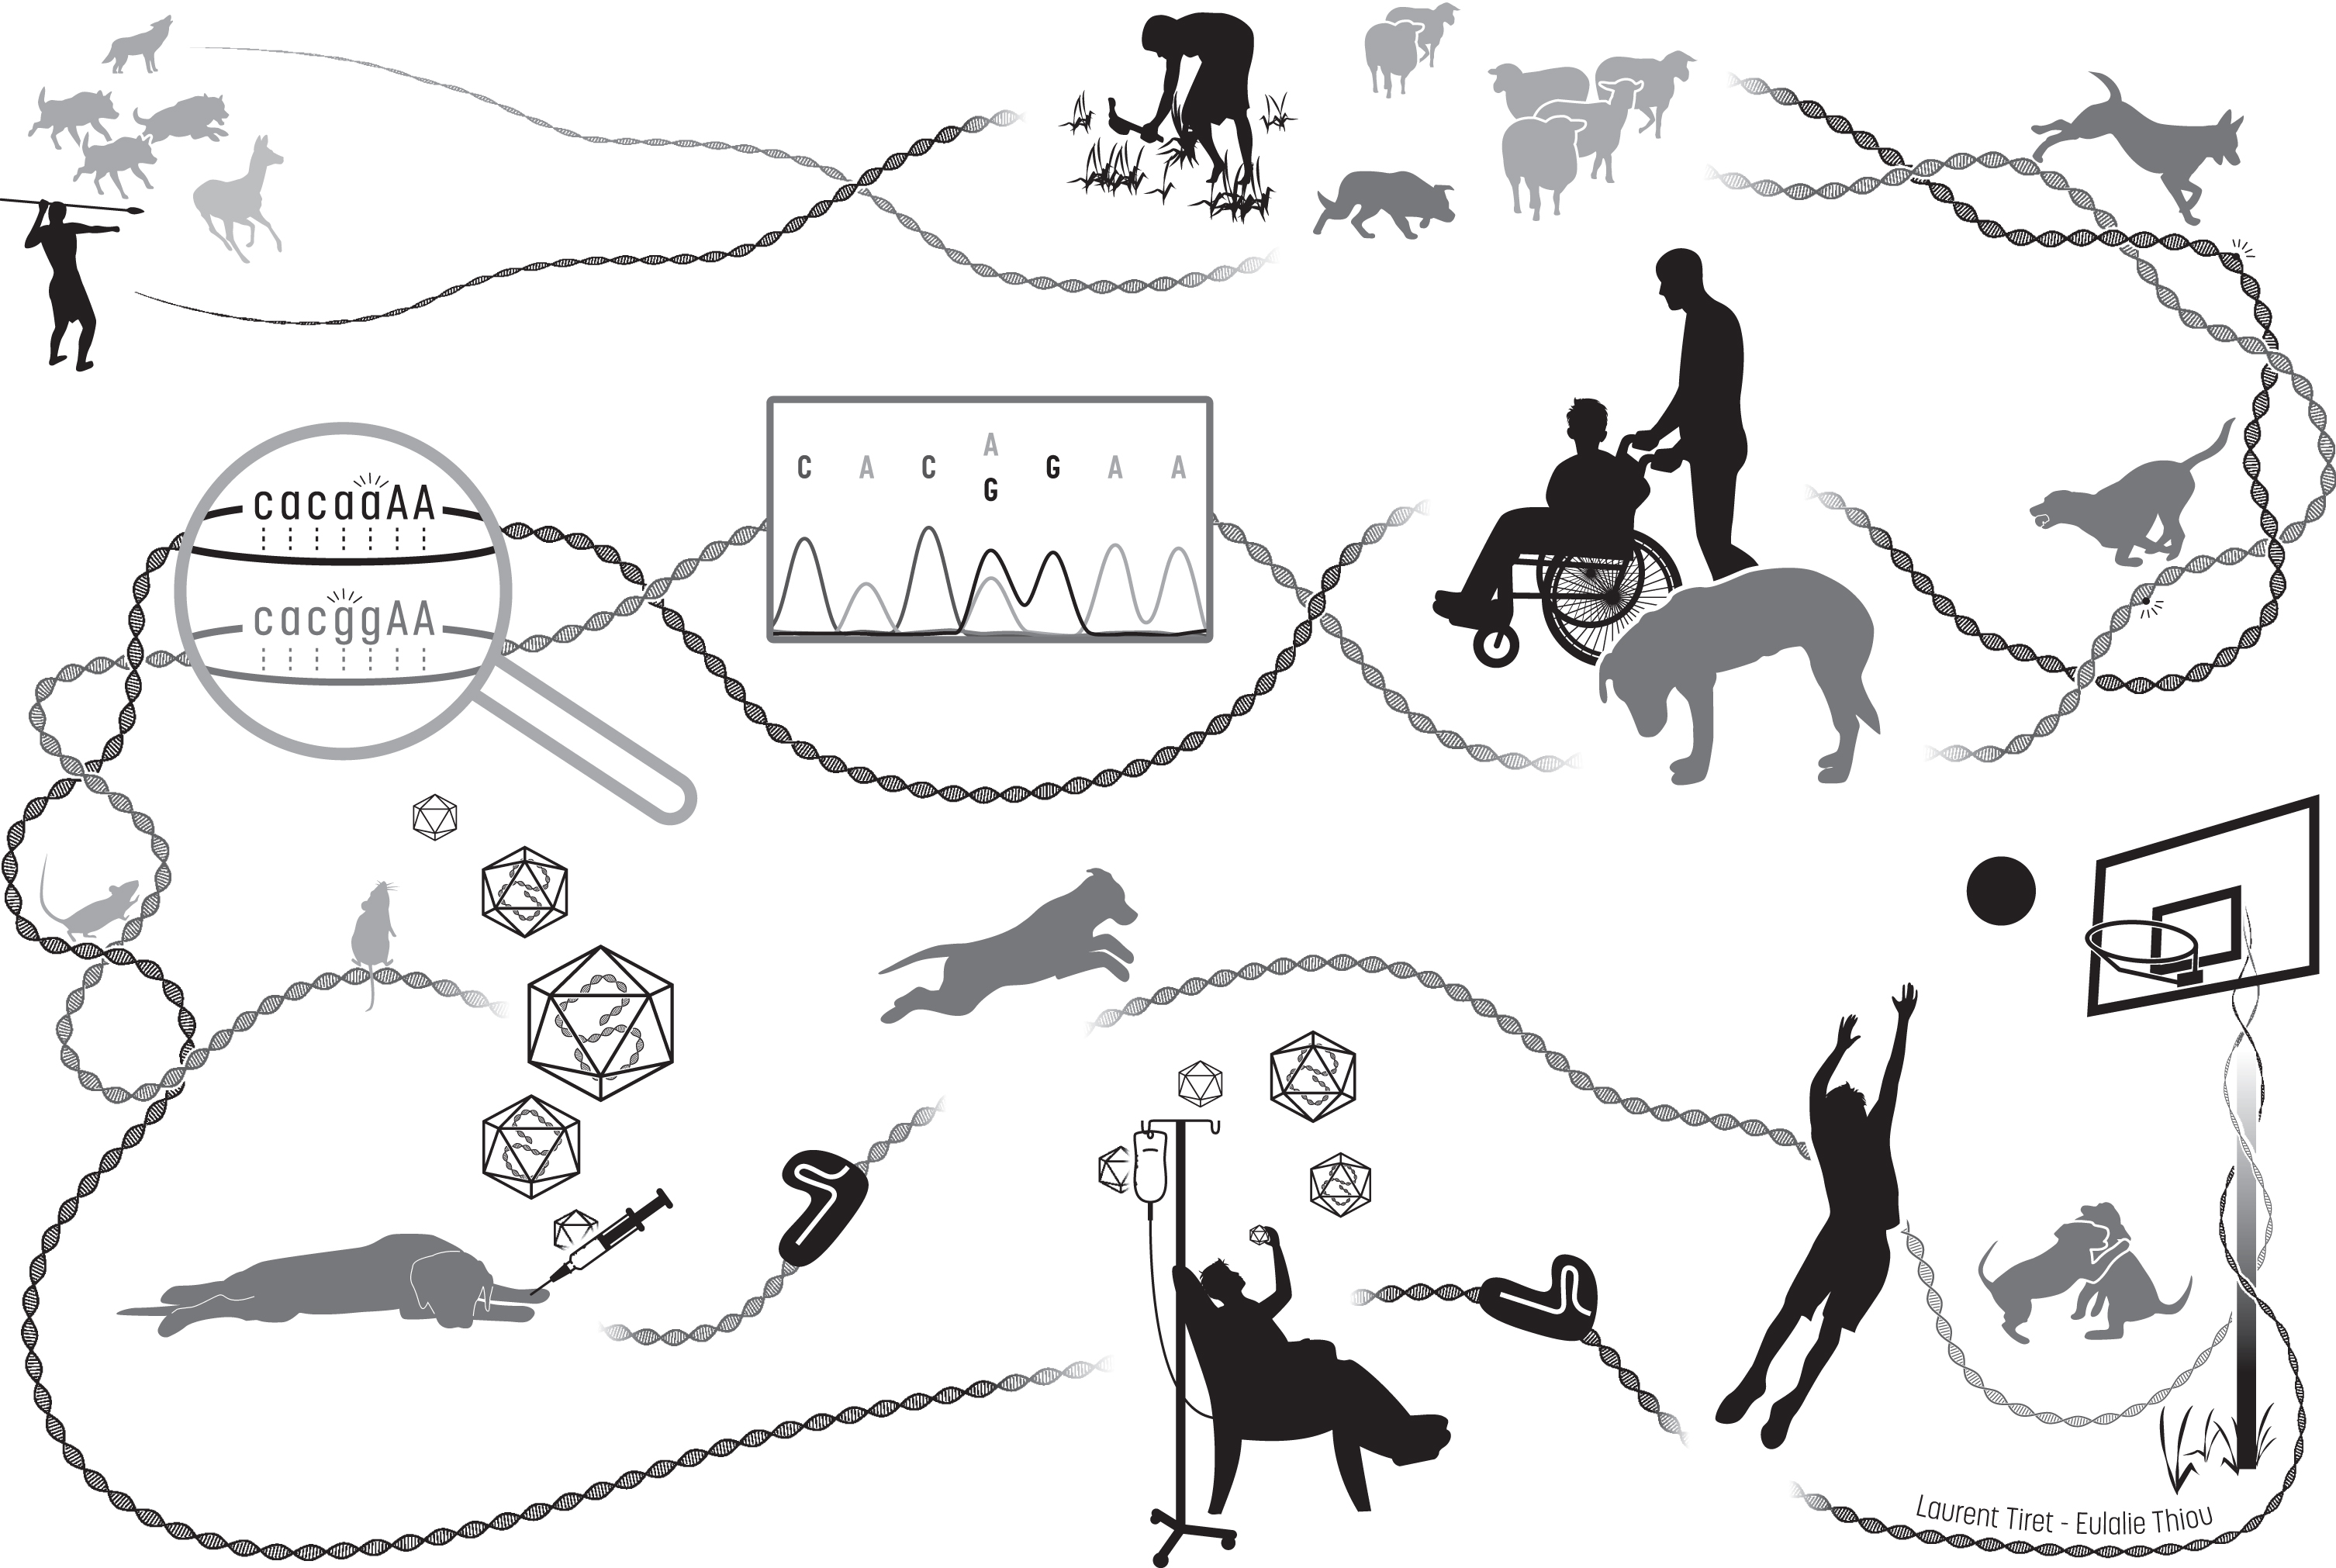 Illustrated history of the intermingled Humankind and dog recent evolution, from domestication to comparative medicine. From the upper left corner, then along the DNA path: in prehistoric paleolithic times, Homo sapiens ancestors and grey wolves which are dogs’ ancestors may have developed similar social abilities for cooperative problem solving, synergizing in convergent actions such as hunting. Between around 35,000 years ago and the beginning of the Pre-Neolithic starting roughly 11,500 years ago, humans and domesticated dogs achieved more and more cooperative tasks such as protecting herds of other domesticated farm animals. Sharing their daily life and environment resulted in common genomic signatures. By exerting new forms of selection pressure on the dog’s genome, human evolution resulted in many convergent physiological mechanisms. Over the last 300 years, phenotypic diversity increased in dogs following a sustained accentuated artificial selection of desirable traits spontaneously emerging in domesticated dogs, leading to the creation of breeds that are genetic isolates. This unfortunately led to the rapid spread of unwanted breed-specific disease-causing variants that also spontaneously happened, and in particular favored homozygosity of loss-of-function recessive alleles resulting in the emergence of hereditary disorders, including those affecting the neuromuscular system. Dysfunction of convergent physiological mechanisms lead to highly similar pathogenic mechanisms in patients and affected dogs, which are thus relevant spontaneous clinical and molecular models. In the last two decades, comparative medical genetics has allowed to identify 290 human-like disease-causing variants in 190 genes, as illustrated here with the autosomal recessive mutations identified in the same intronic acceptor site of BIN1 in human patients (ag=> aa) and affected Great Danes (ag=> gg) that display a highly similar, rapidly progressive congenital myopathy [60]. Comprehensive, longitudinal characterization of dog diseases helps establish a chronological list of quantified parameters, further used as outcome measures to evaluate in preclinical trials the relevance of innovative therapeutic strategies, such as virally-vectorized delivery of genes, oligonucleotides or the CRISPR/Cas9 machinery driving genome edition, previously shown to be effective in mice. Once validated in the large mammalian dog model, the proposed treatment can be assessed in patients enrolled in clinical trials. Robustness of this biomedical continuum in the myology field has recently been exemplified by the AAV-mediated MTM1 gene therapy [38].